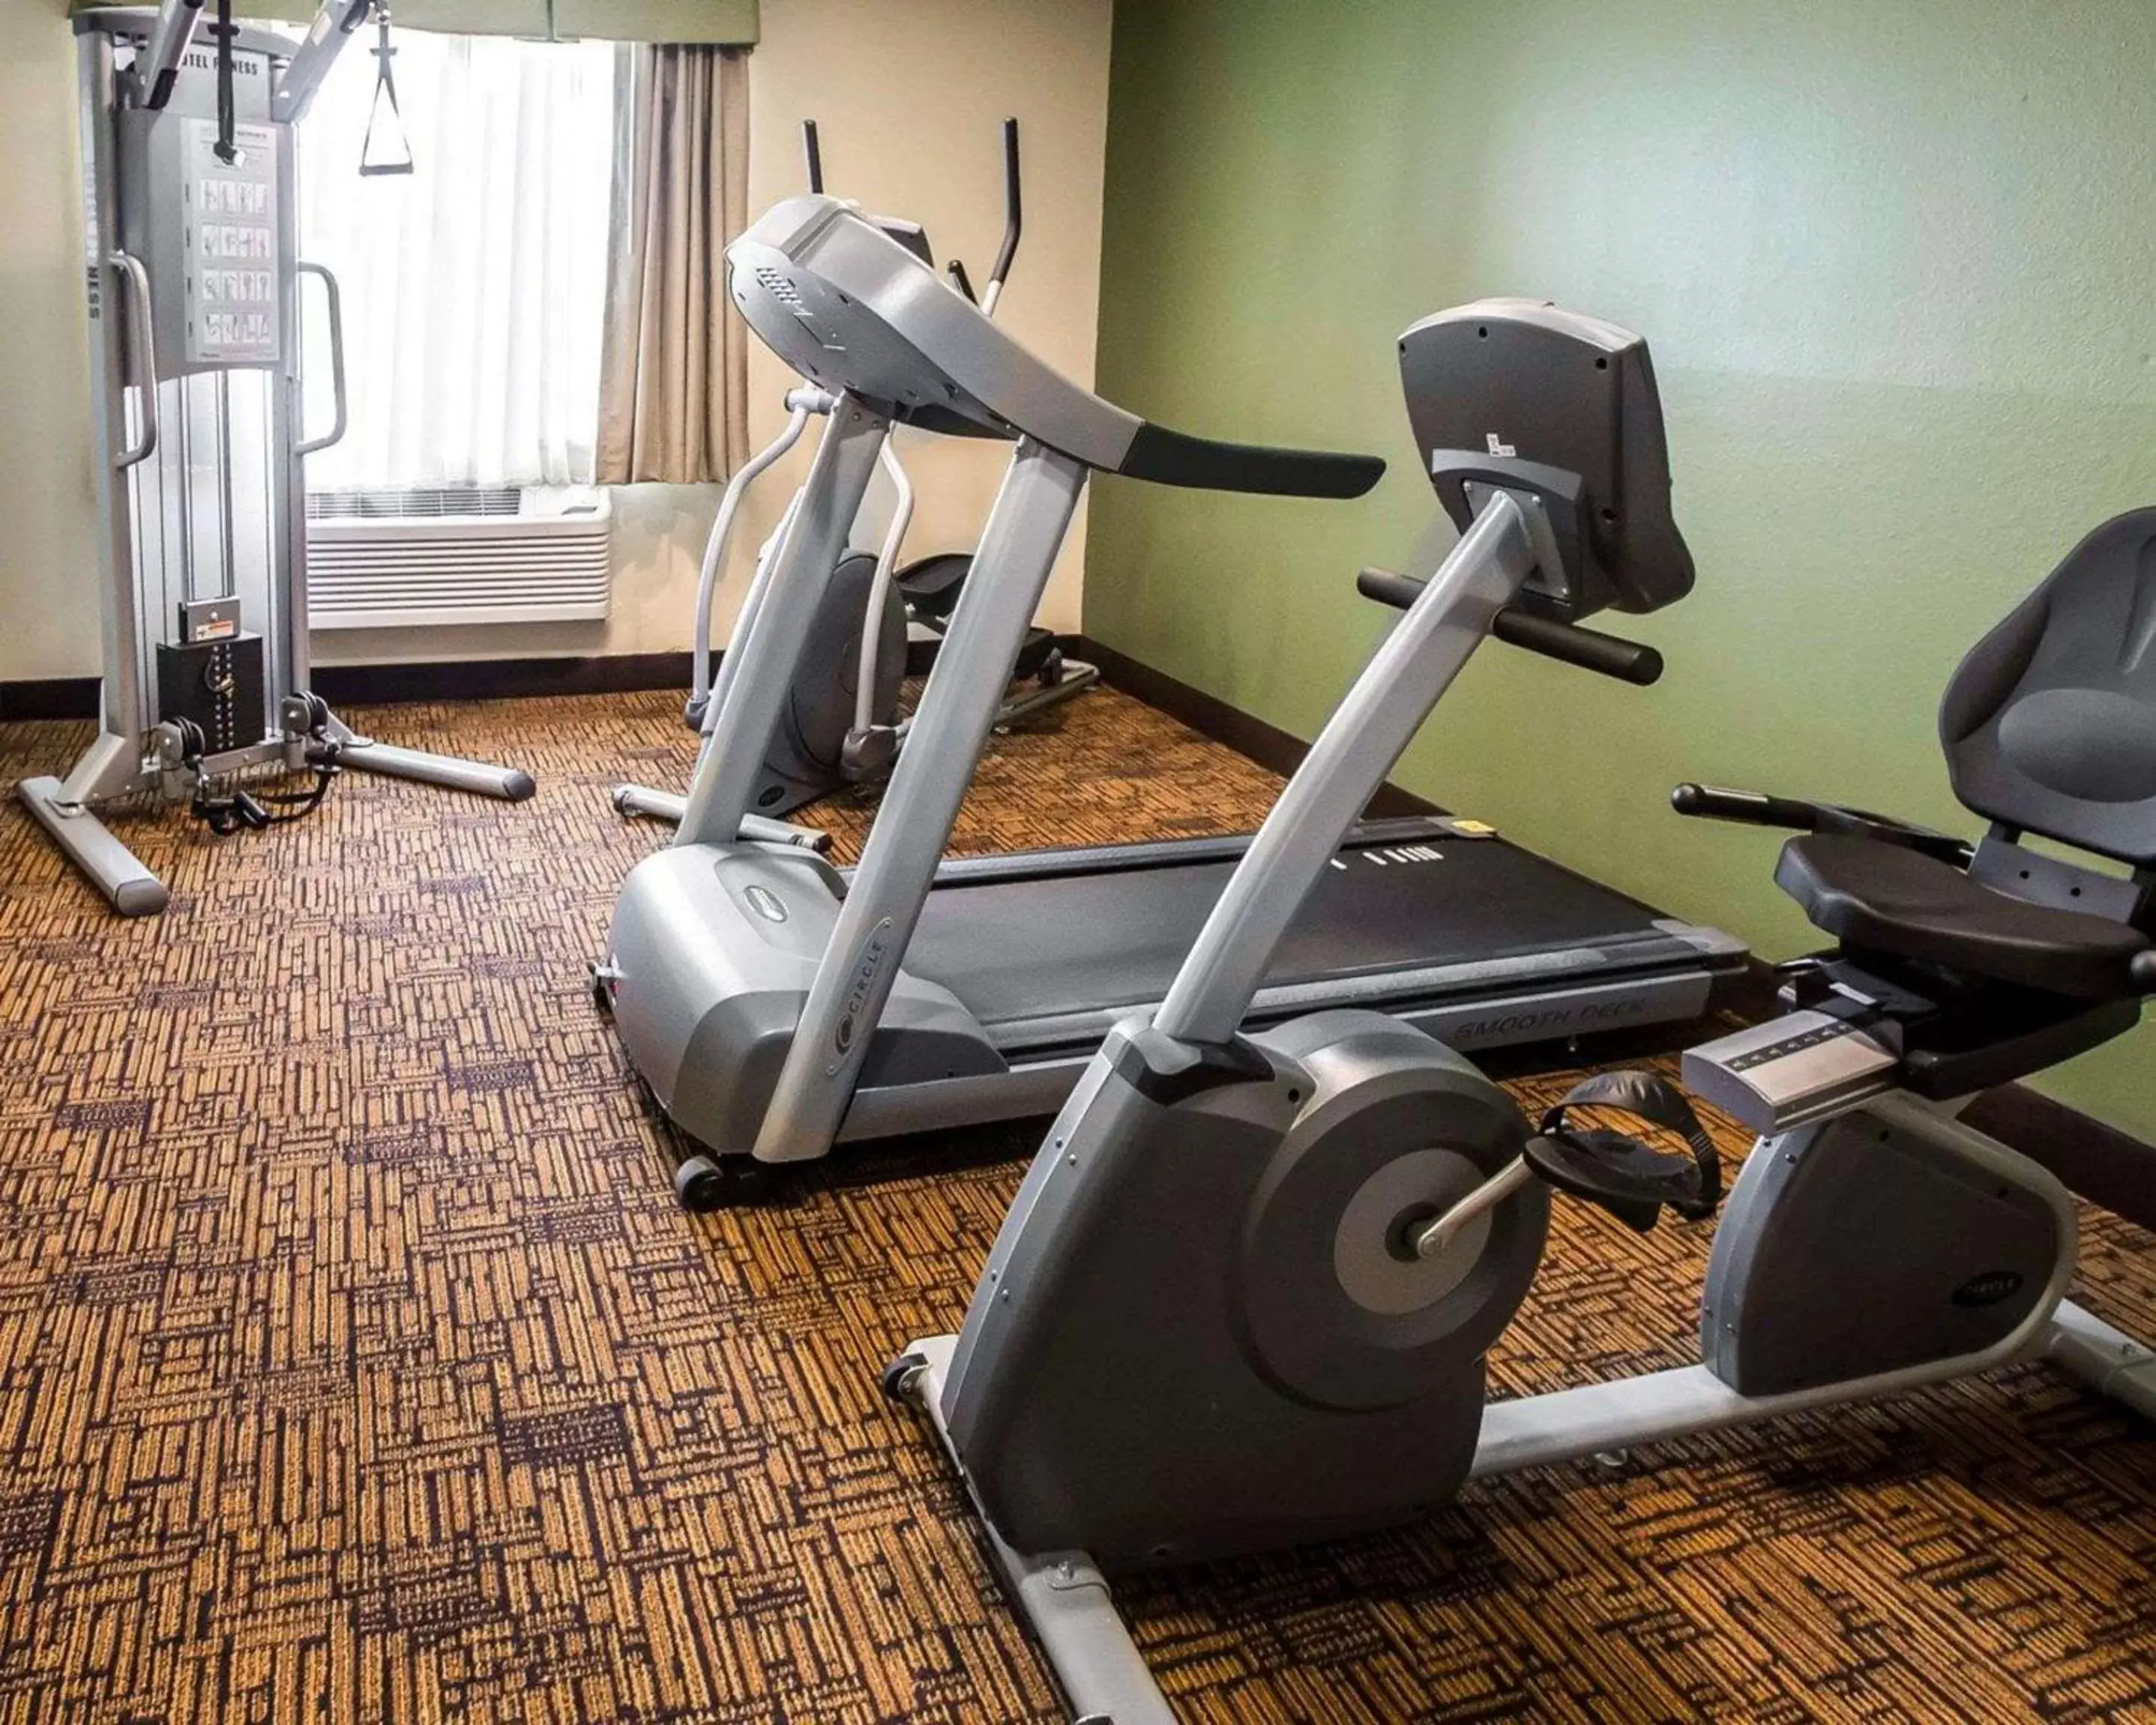 Fitness centre/facilities, Fitness Center/Facilities in Quality Inn Chesterton near Indiana Dunes National Park I-94